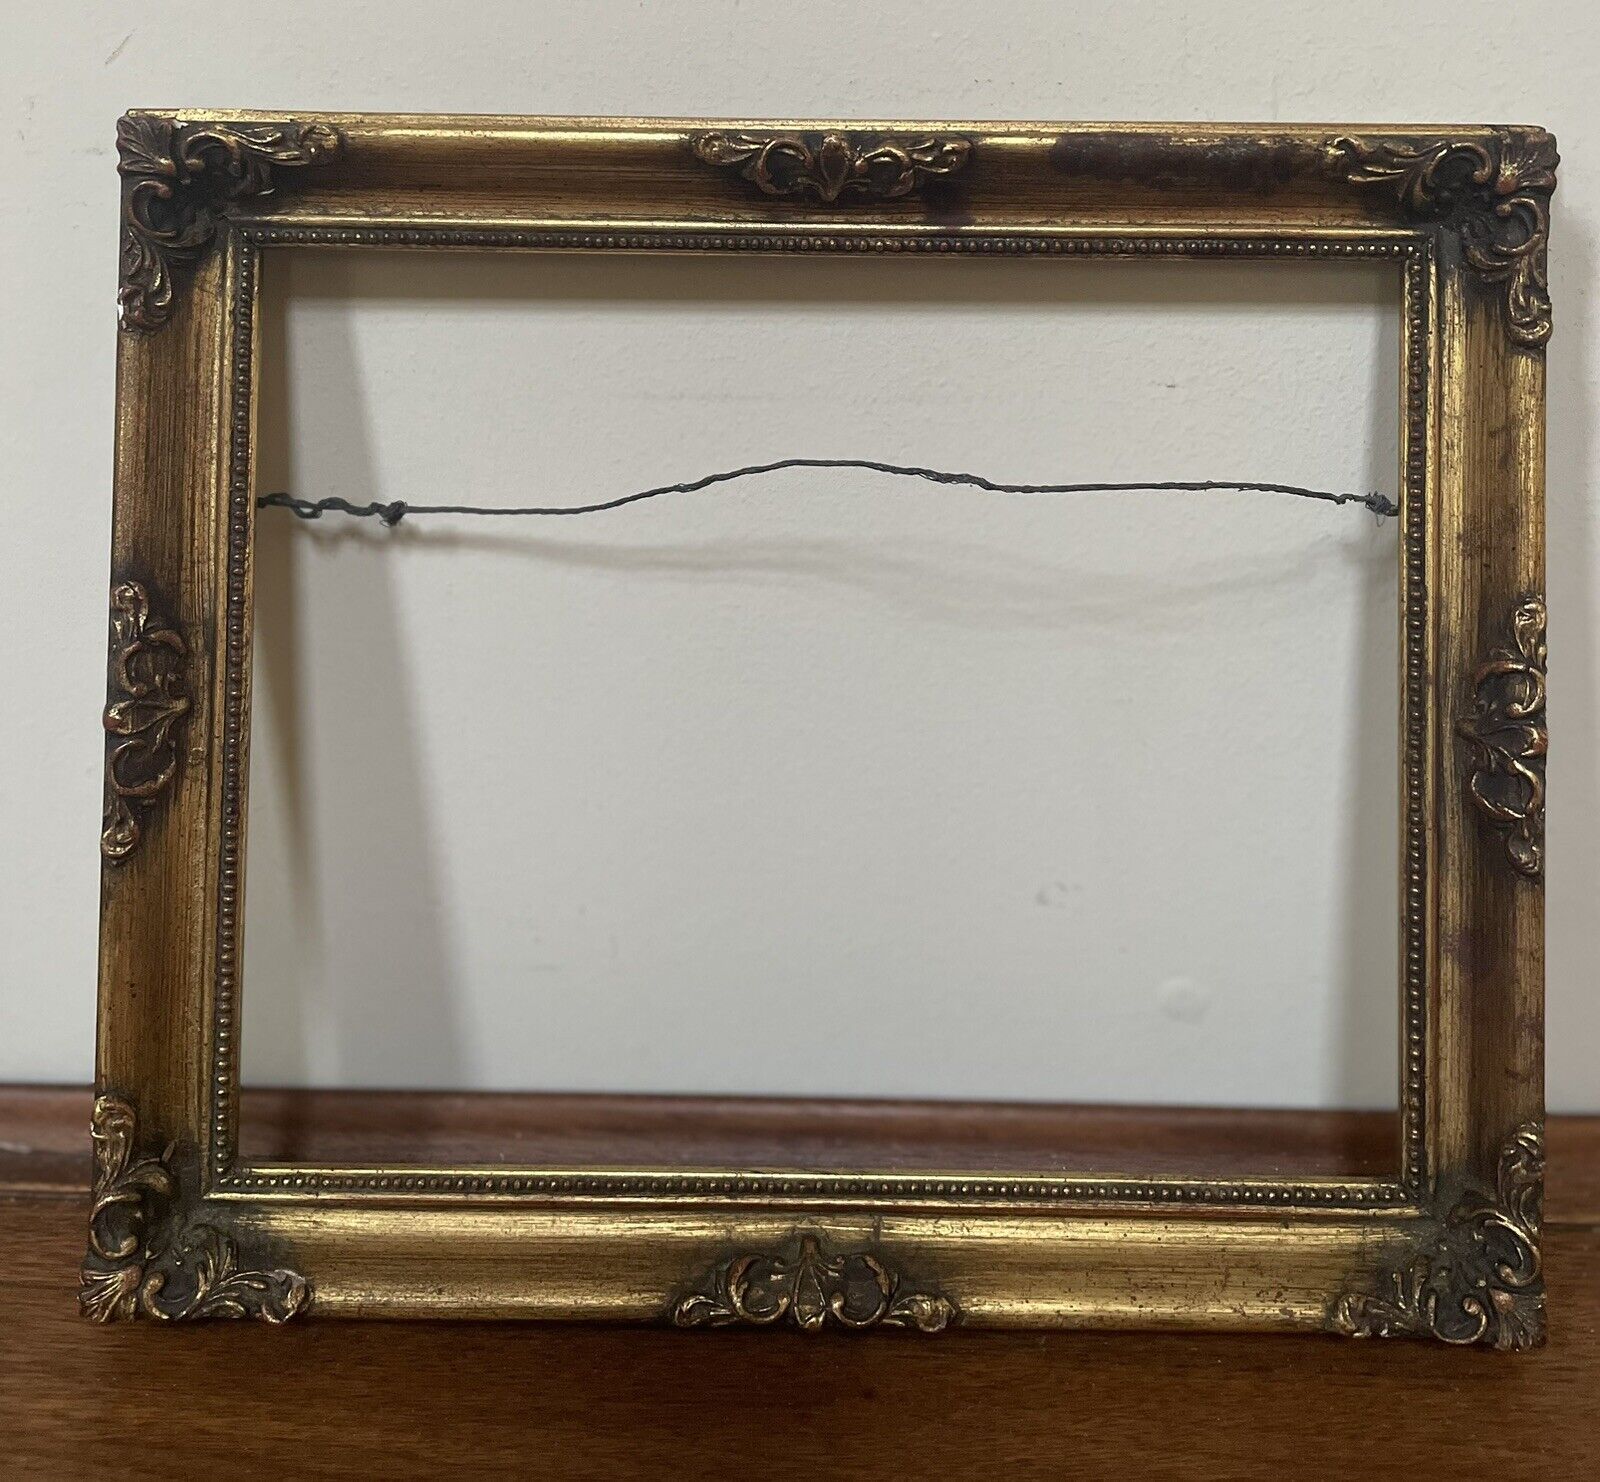 Antique Gilded Ornate Wooden Art Frame-10”x12”x1”/Fit 10”x8”